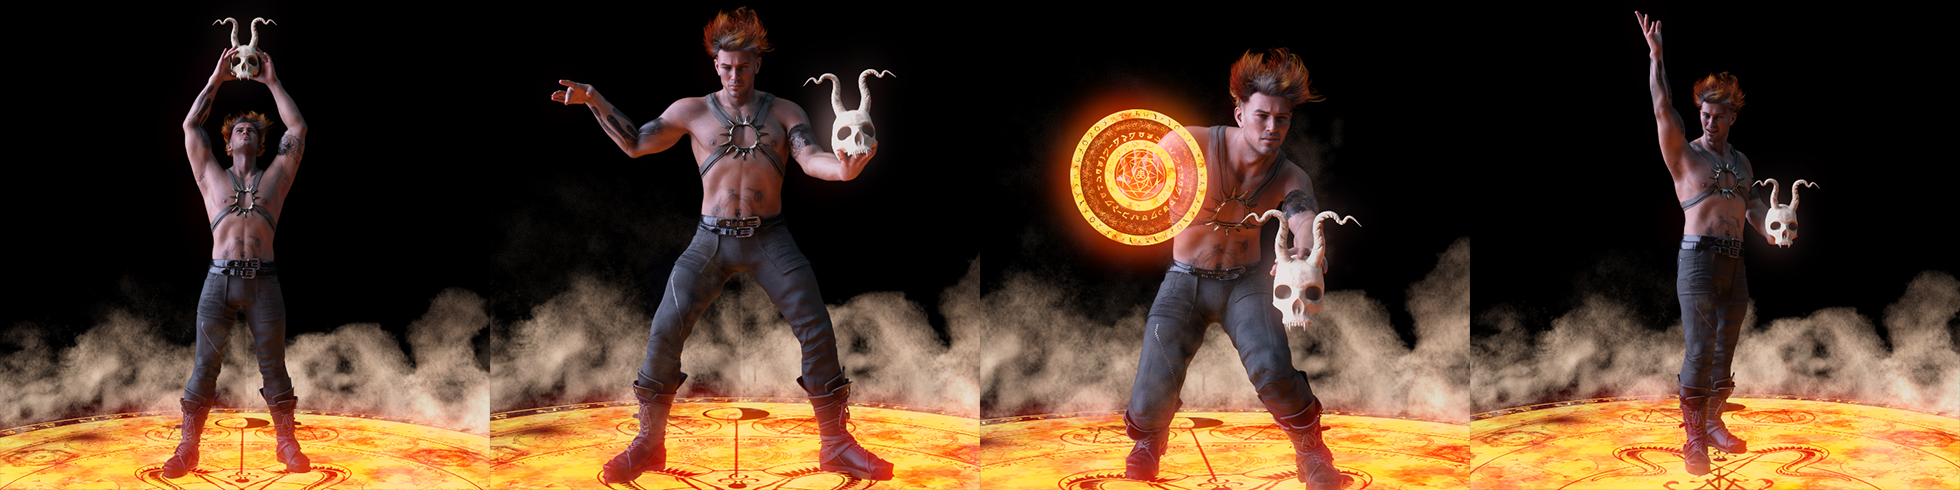 Surge: Necromancer Props and Poses for Genesis 8 and 8.1 by: Skyewolf, 3D Models by Daz 3D